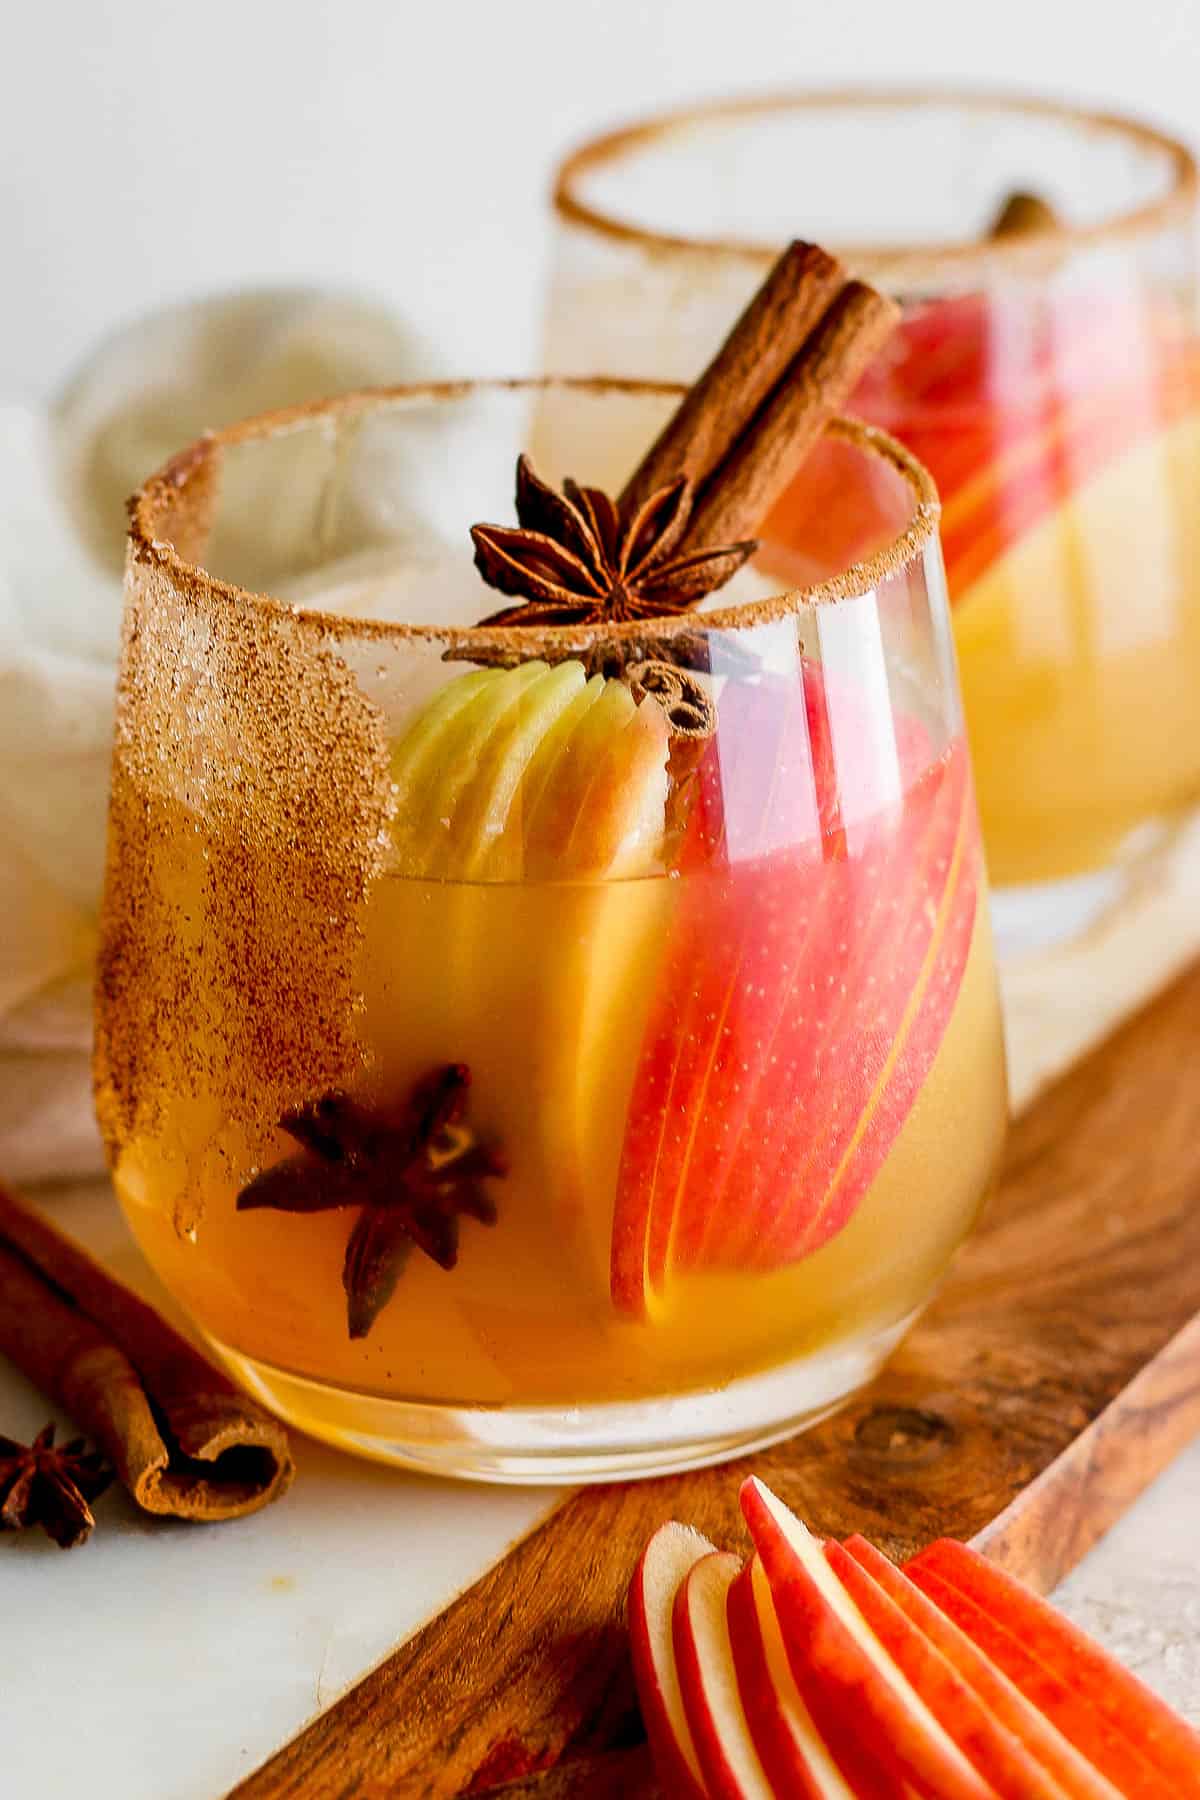 Apple cider margarita garnished with apple slices, star anise, and a cinnamon stick.